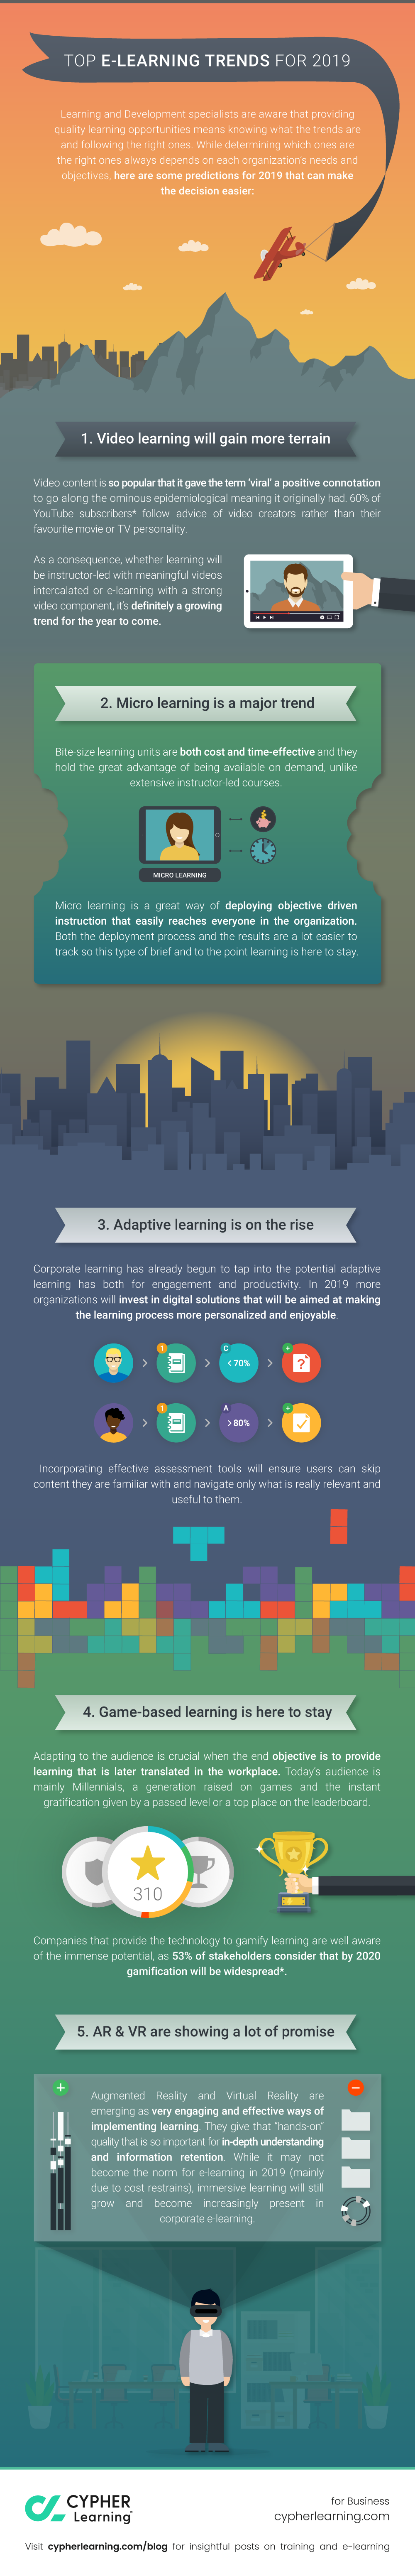 Top e-learning trends for 2019